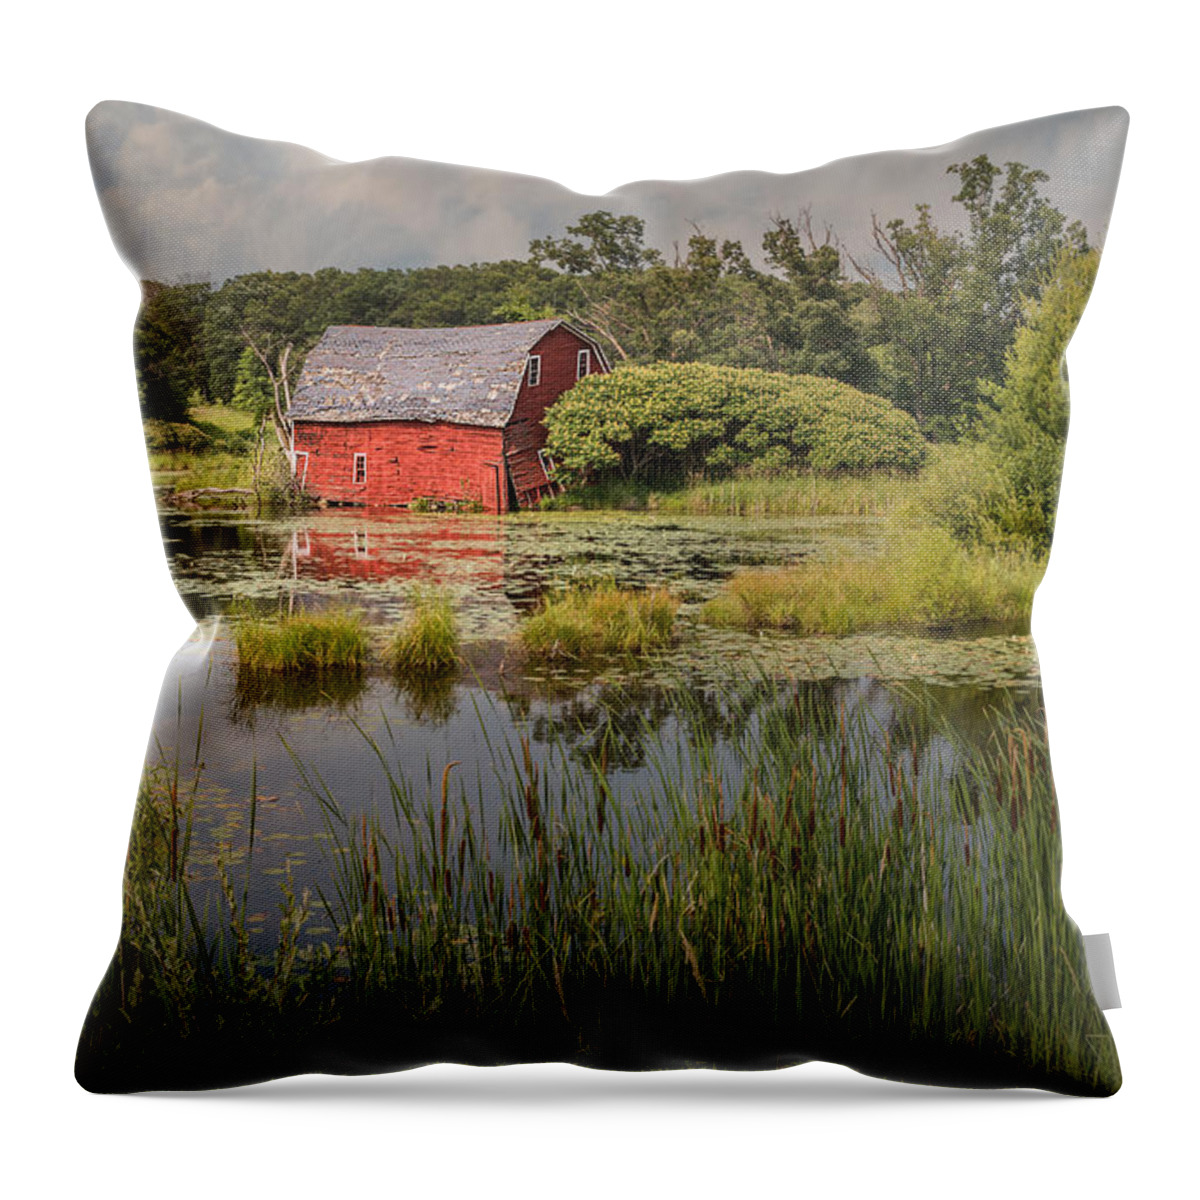 Barn Throw Pillow featuring the photograph Sinking Red Barn #3 by Patti Deters